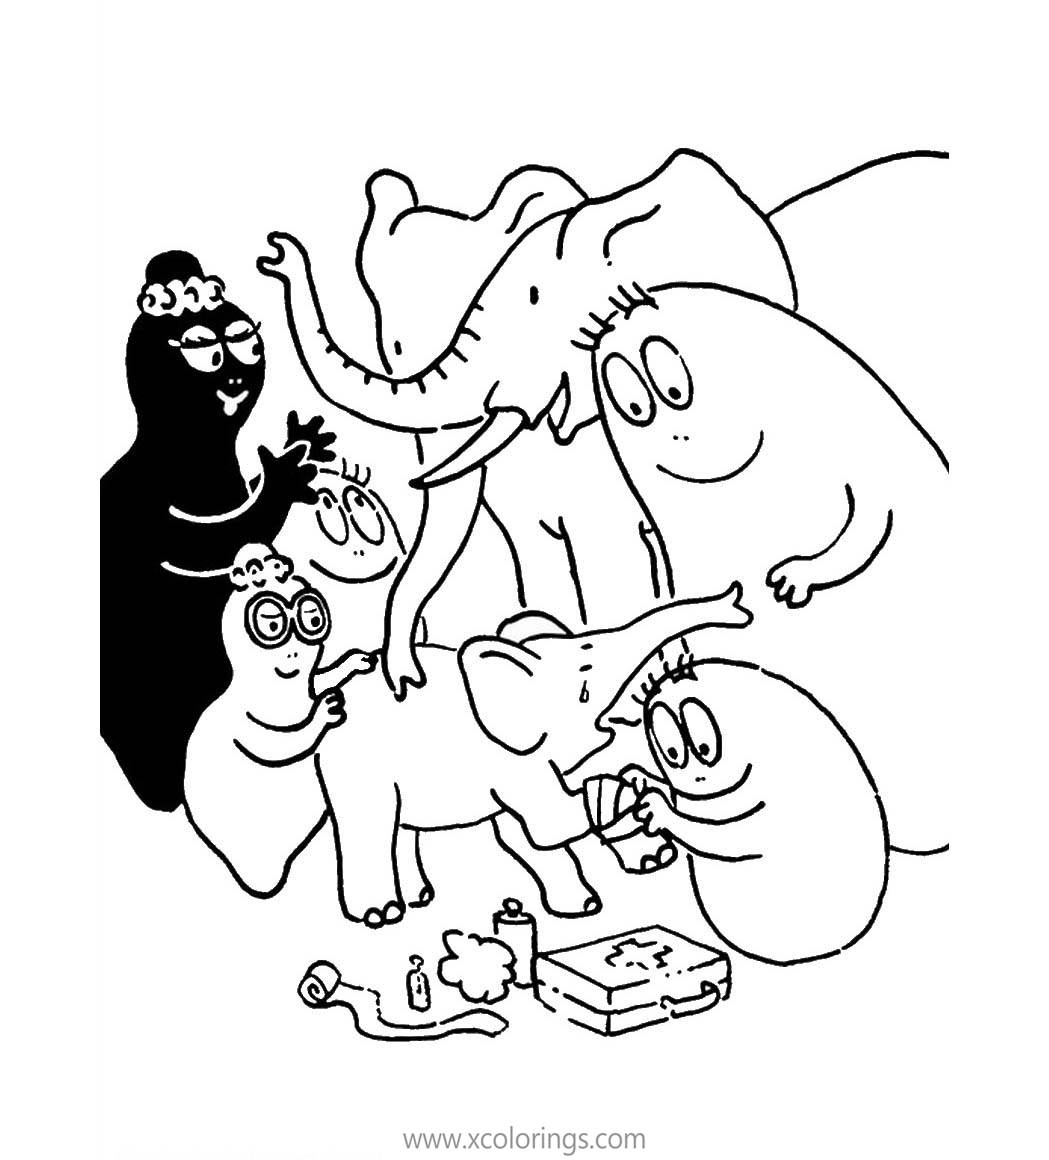 Free Barbapapa Coloring Pages Helping a Little Elephant printable